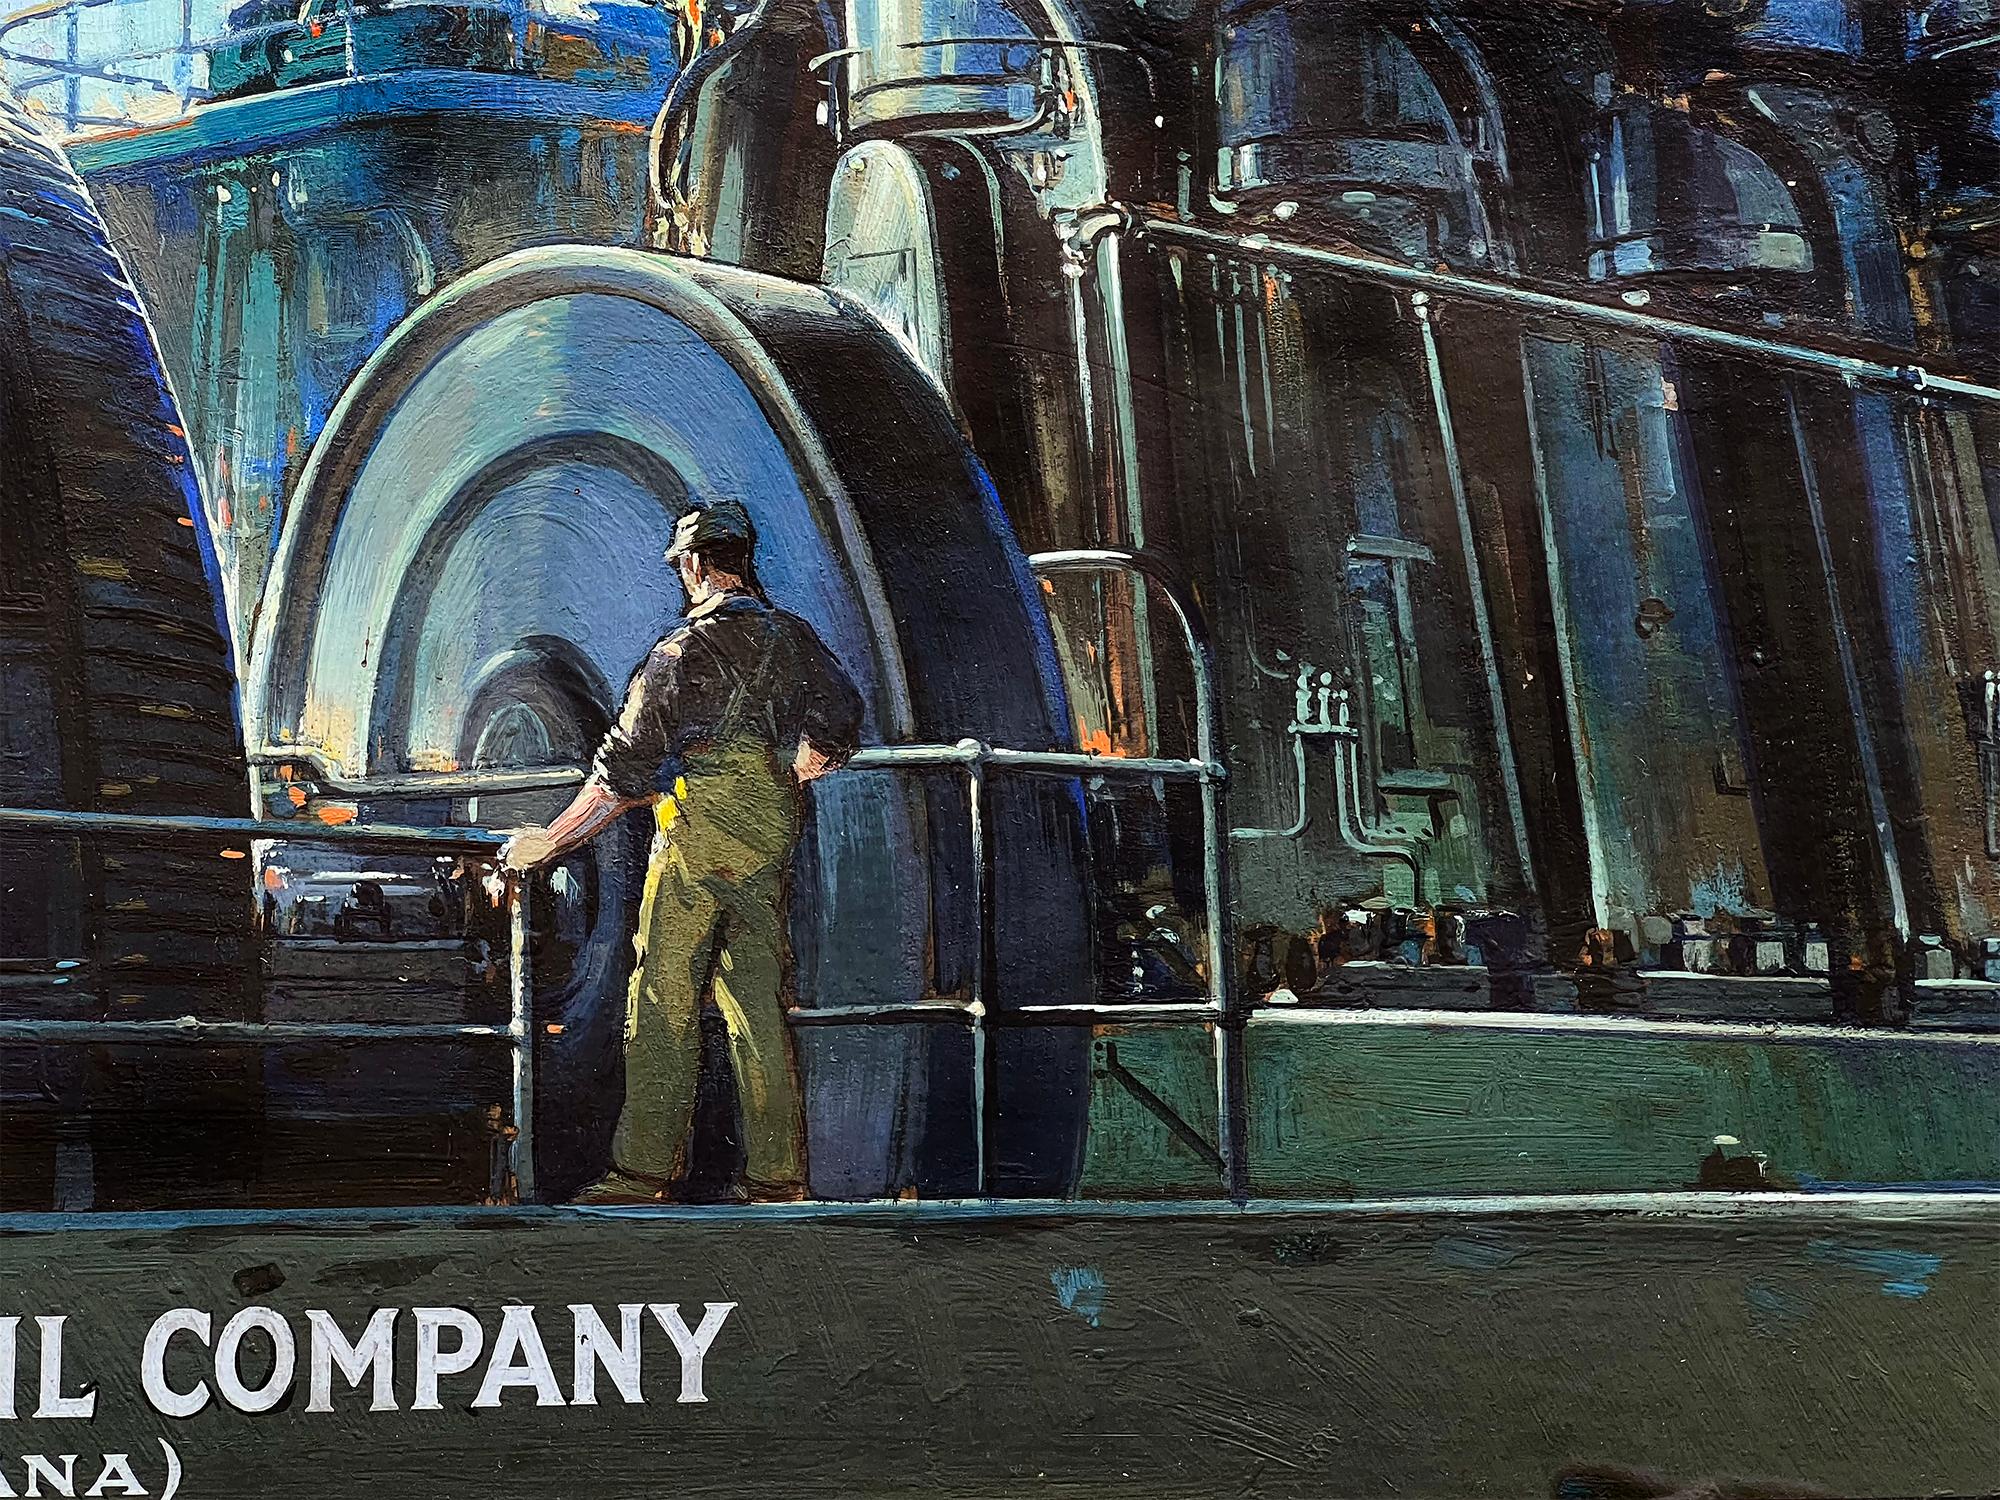 Wheels of Industry Past and Present, Golden Age of Illustration - Standard Oil - Painting by American illustrator c1930